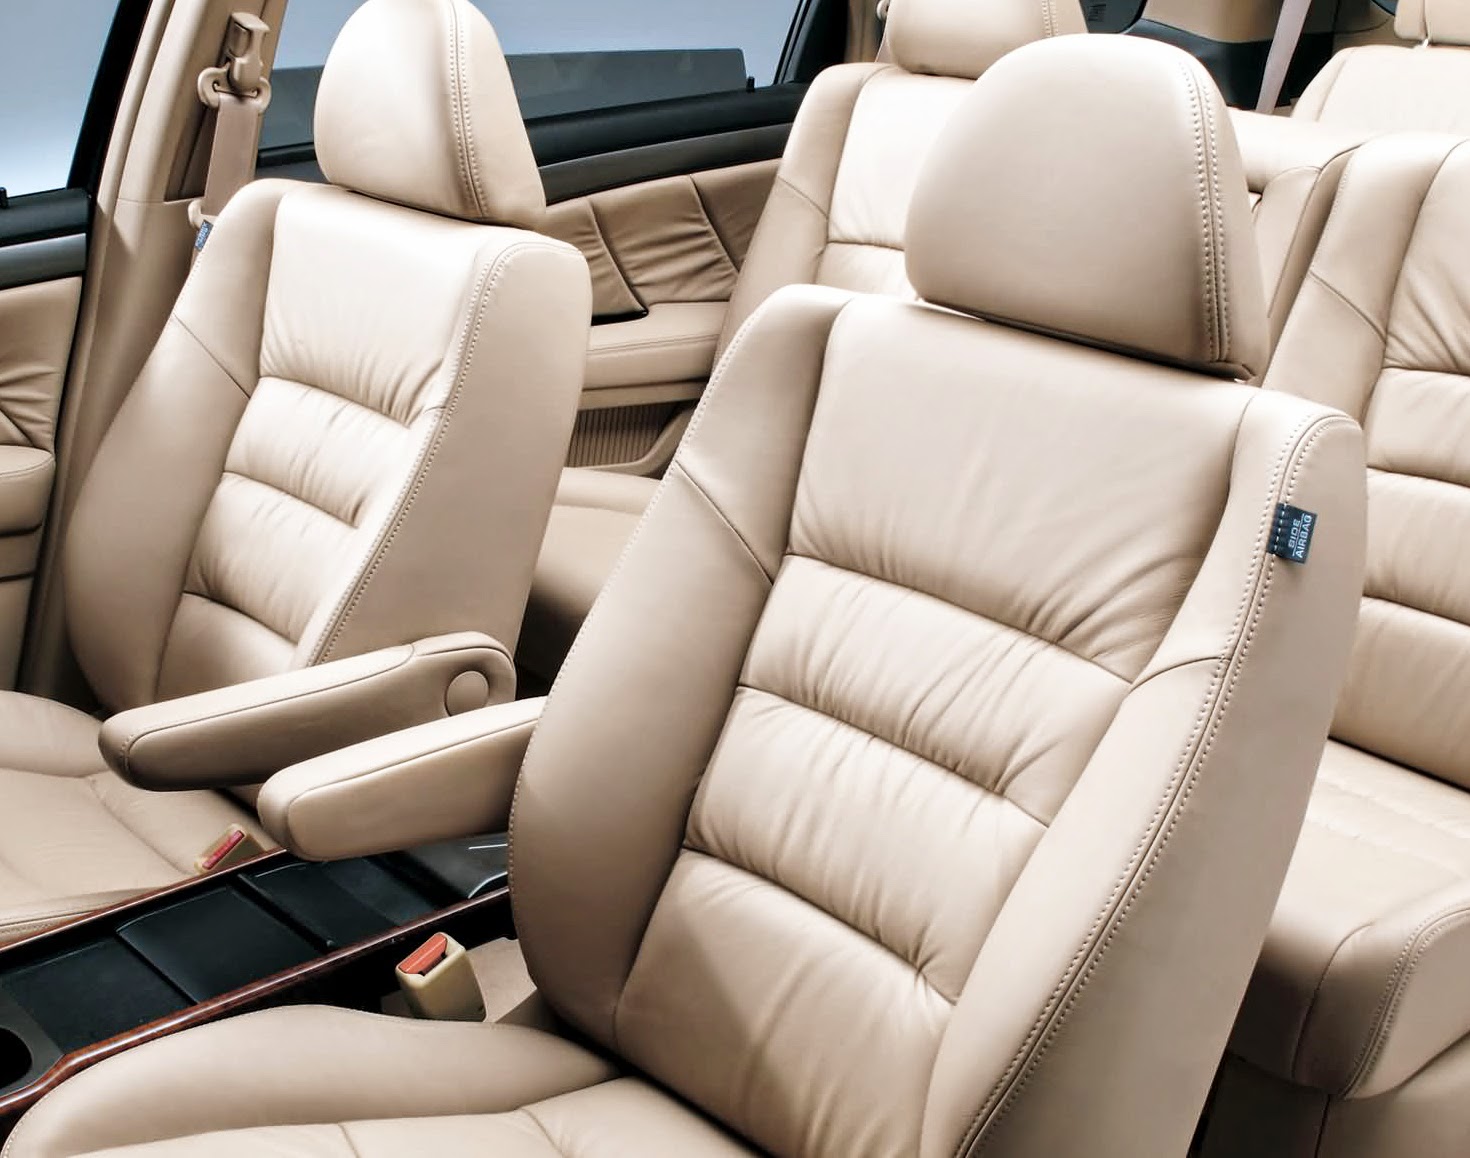 Purchasing Leather Car Seat Covers: Remaining Classy